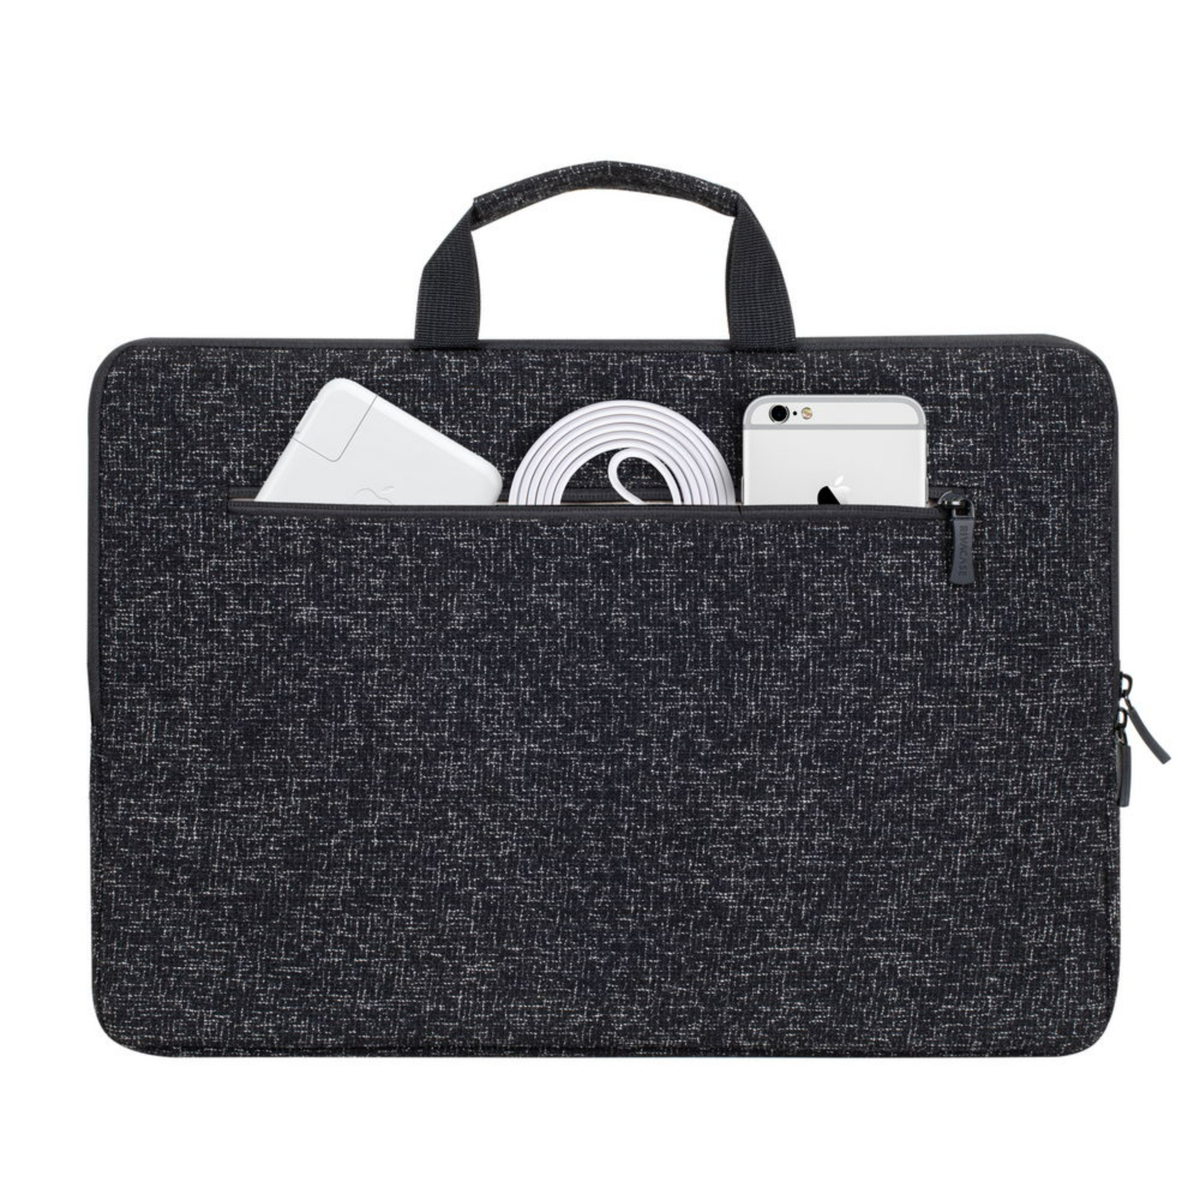 Rivacase Macbook Sleeve with Handles, 15.6 inches, Black, 7915